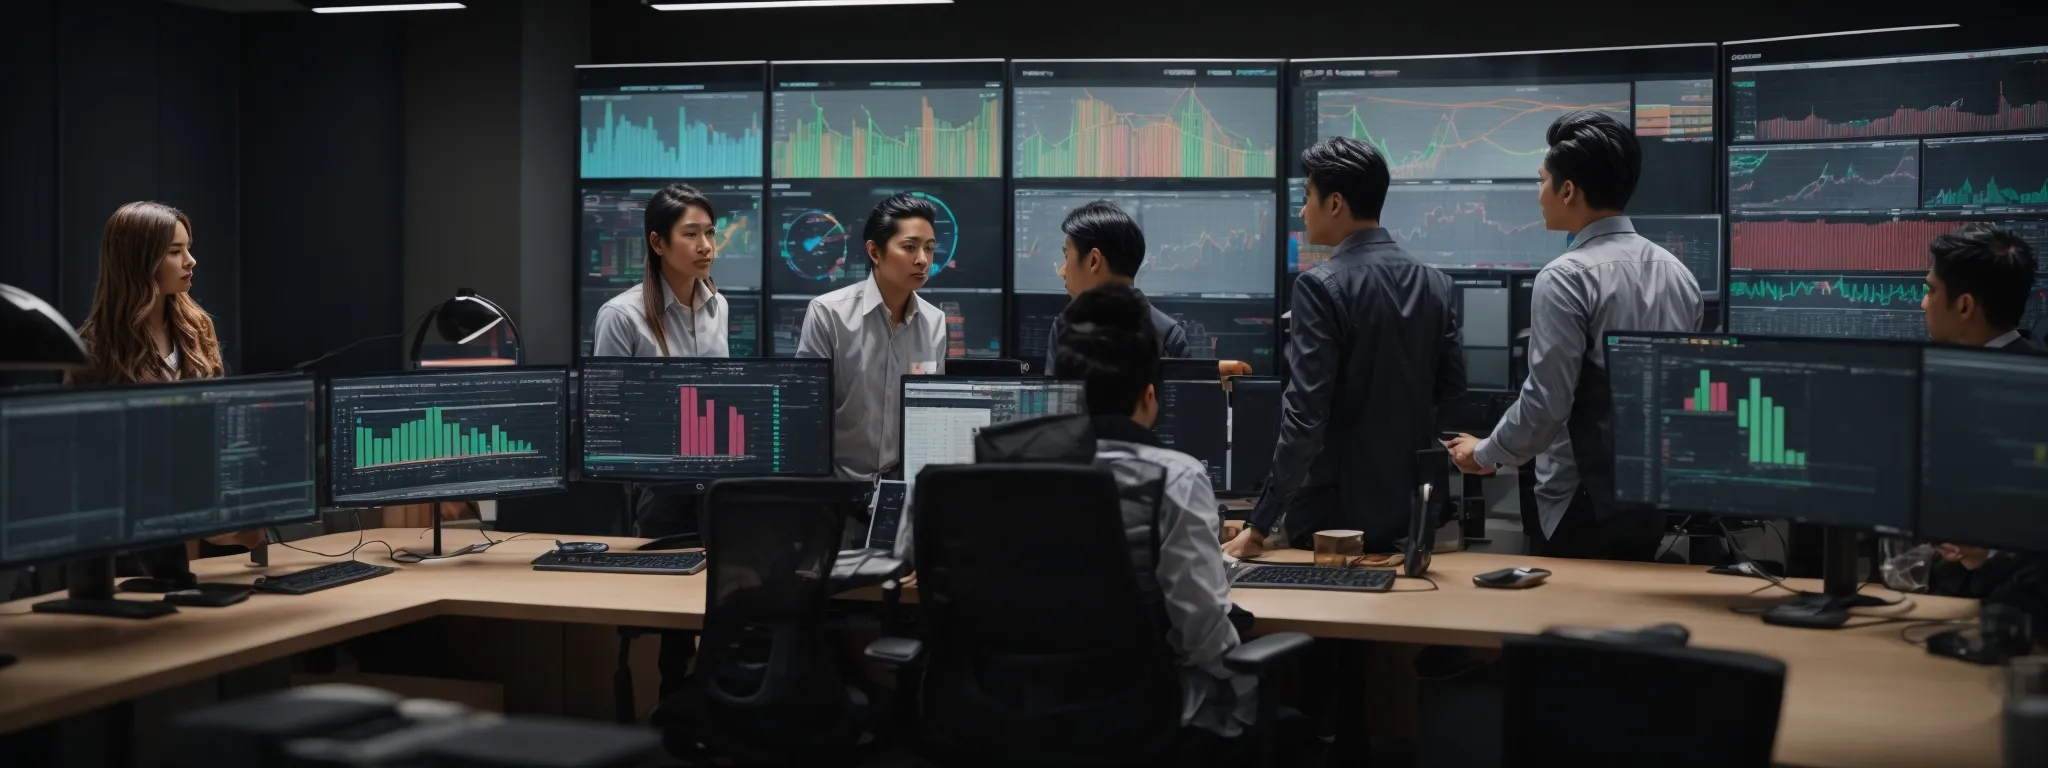 a group of professionals in a relaxed office environment, visibly collaborating and strategizing around a large monitor displaying colorful analytics graphs.